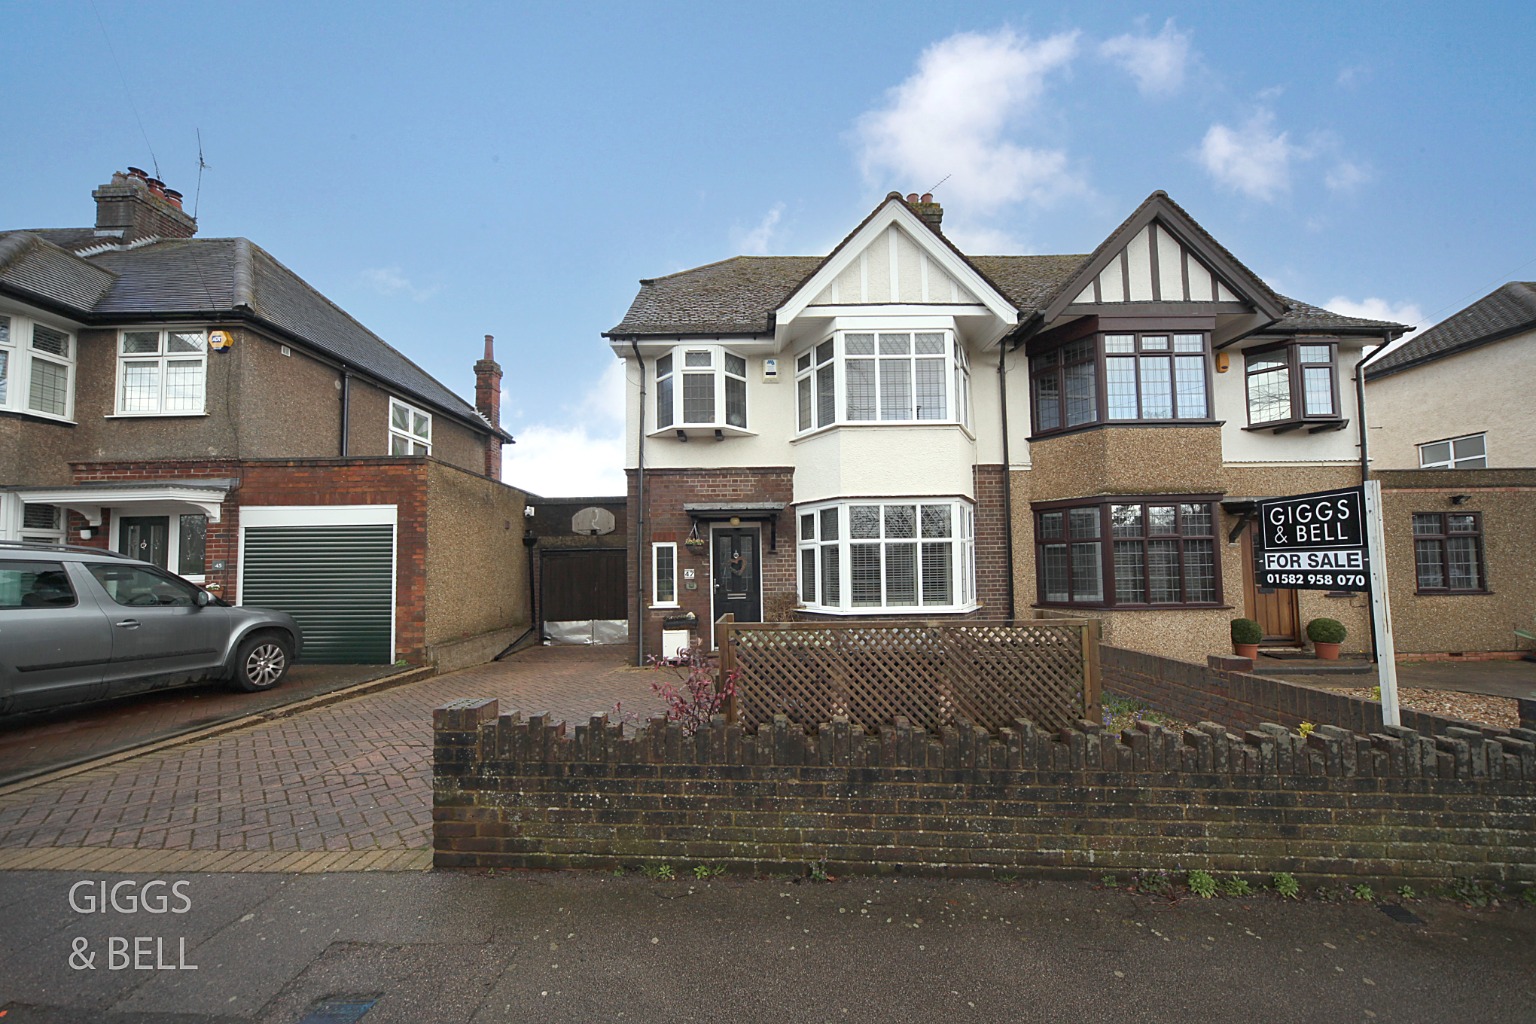 3 bed semi-detached house for sale in West Hill Road, Luton - Property Image 1